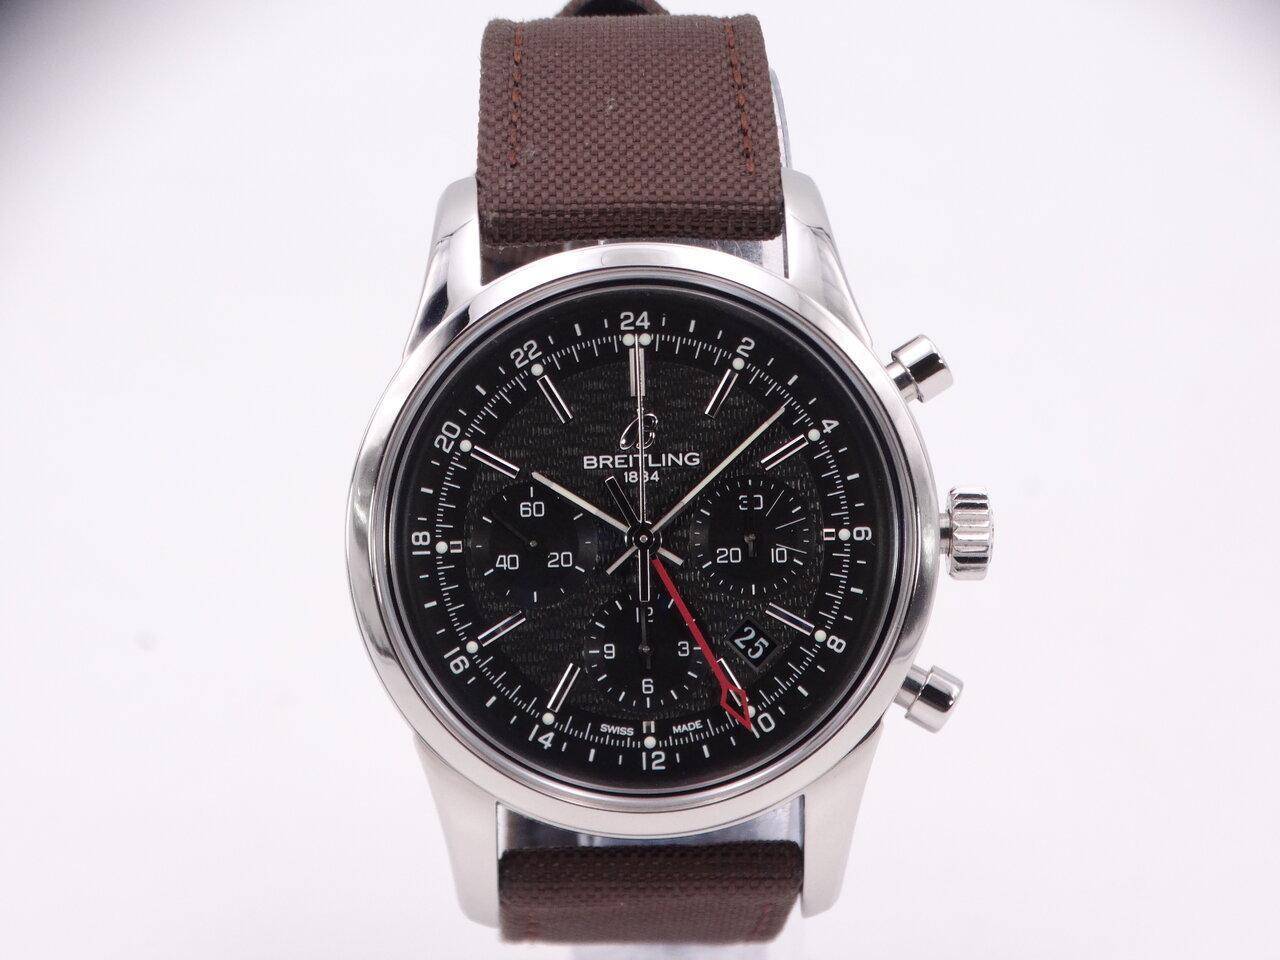 Breitling Transocean Chronograph GMT Limited Edition 00575.JPG